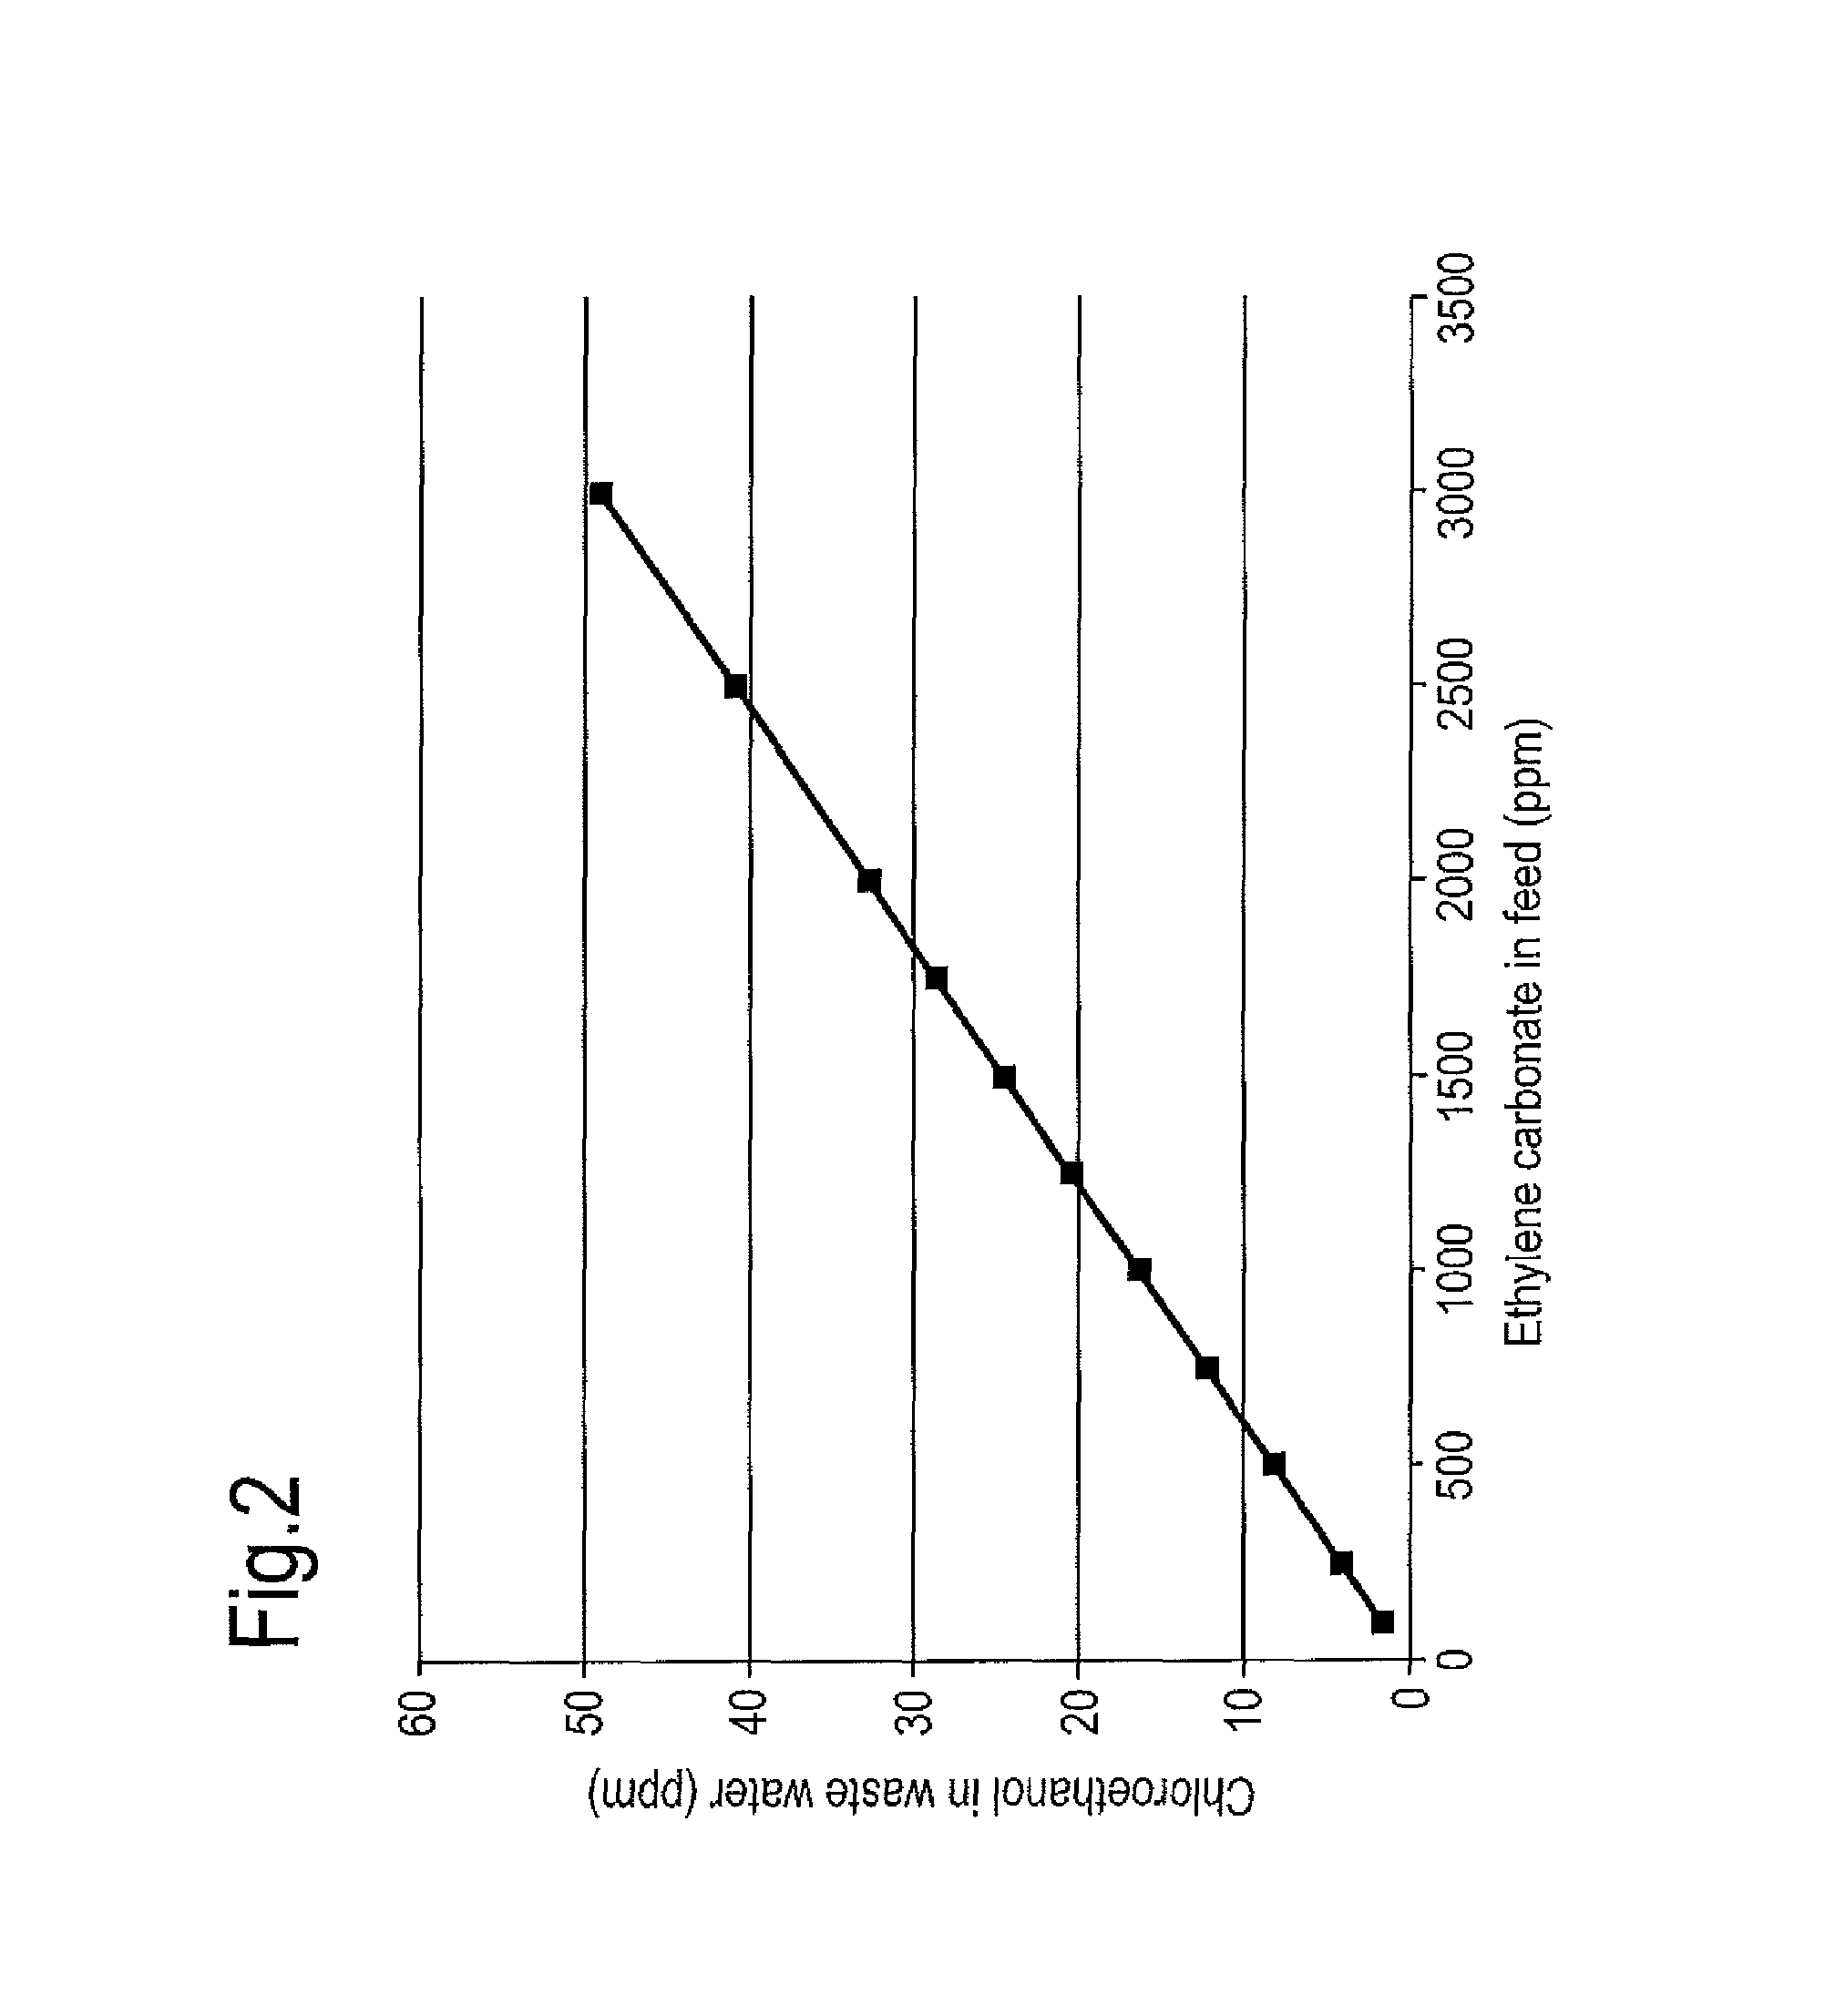 Process for the preparation of ethylene glycol